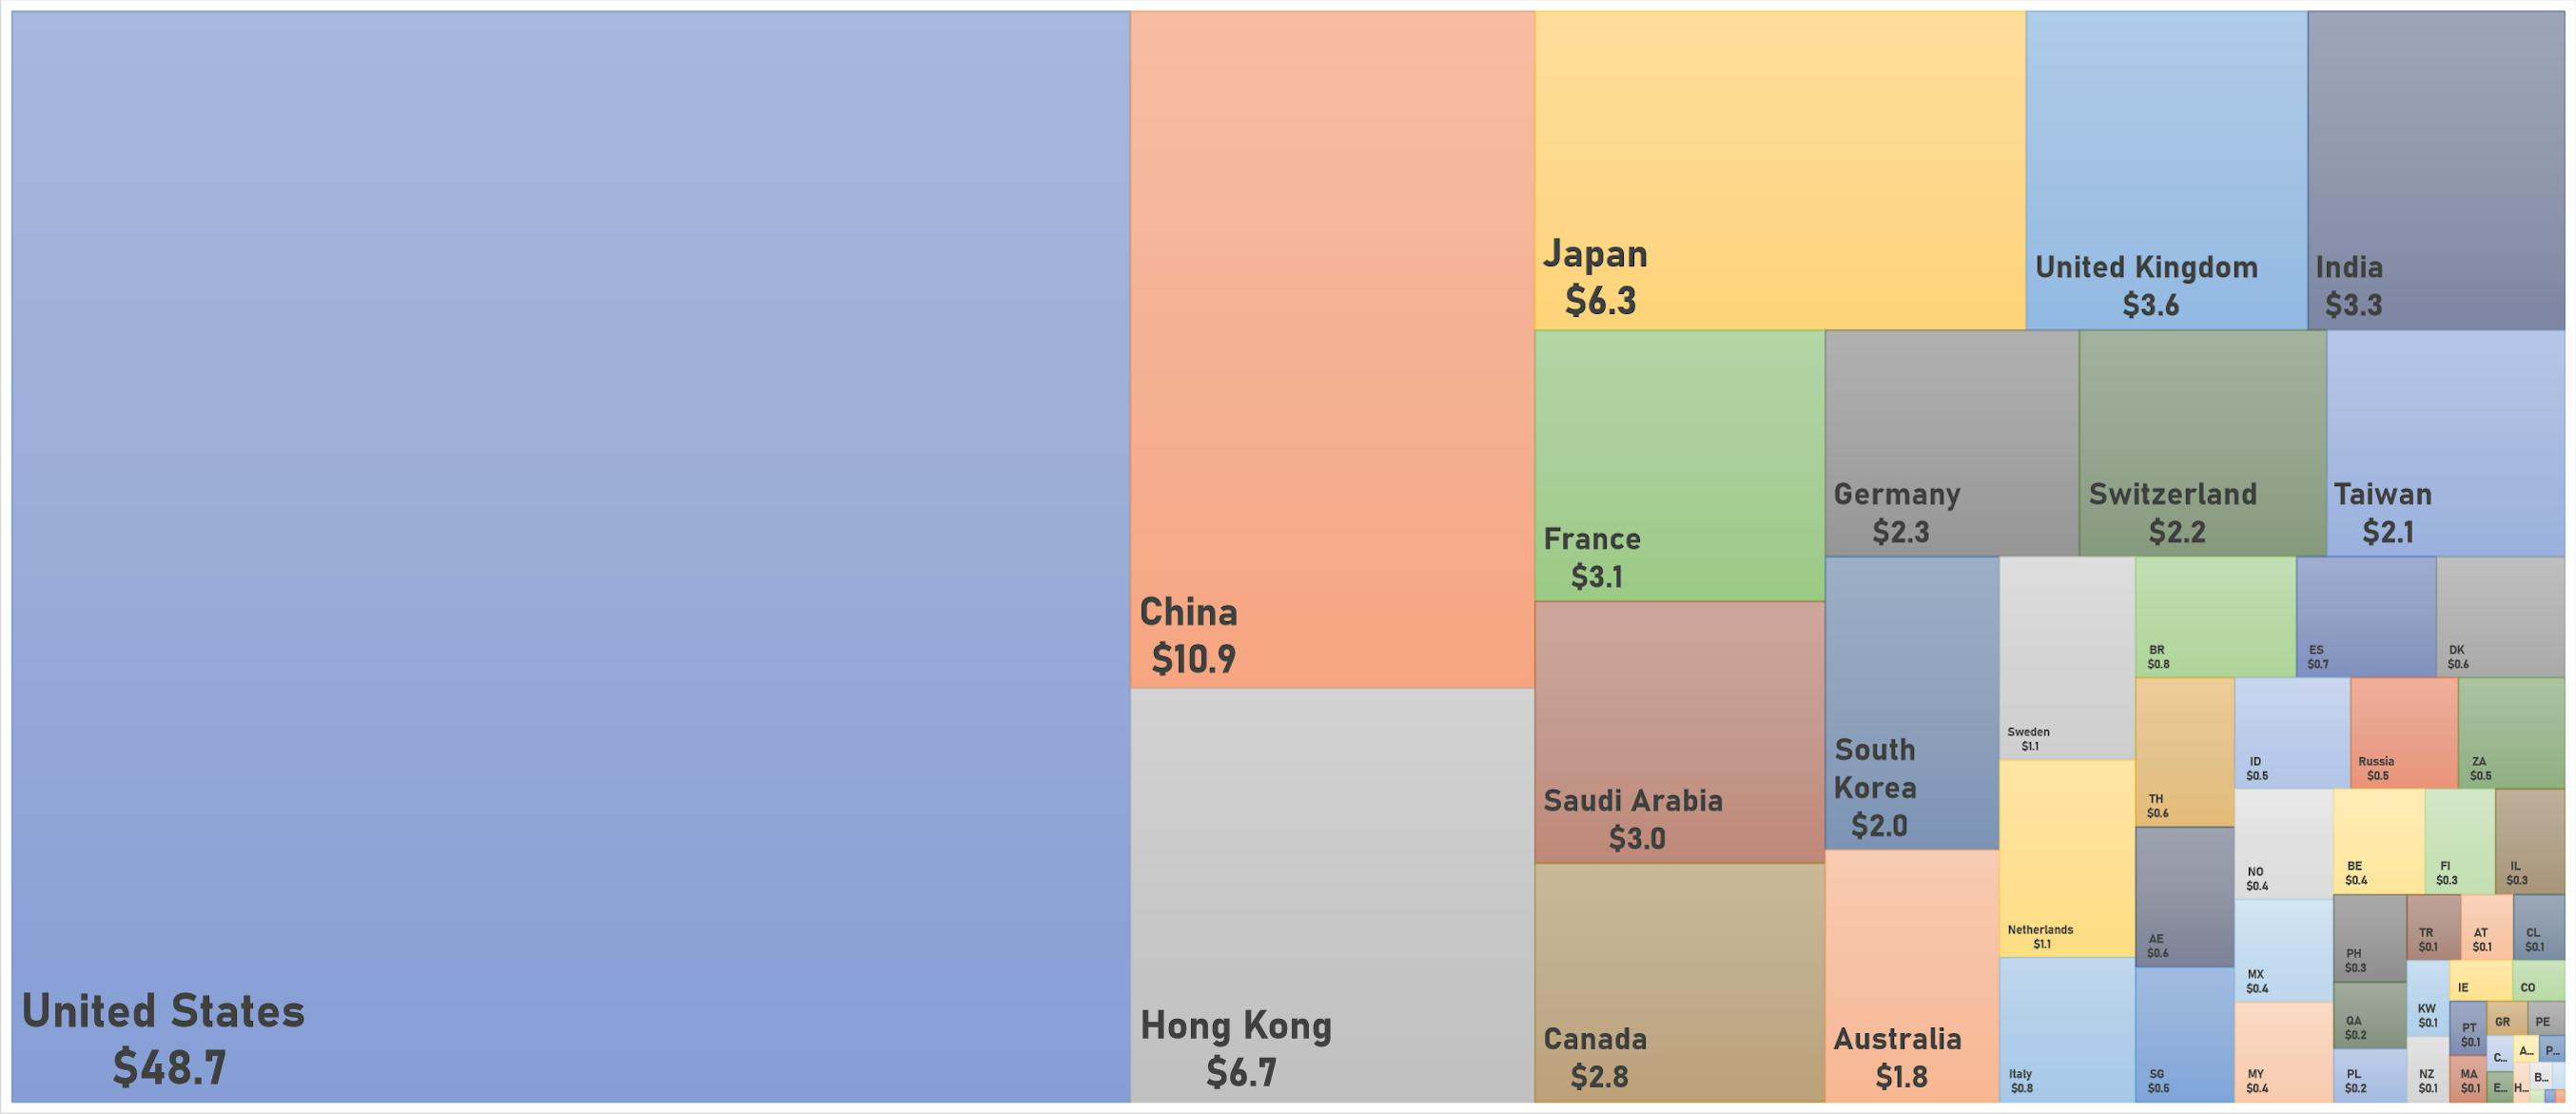 World market capitalization broken down by country | Sources: phipost.com, FactSet data